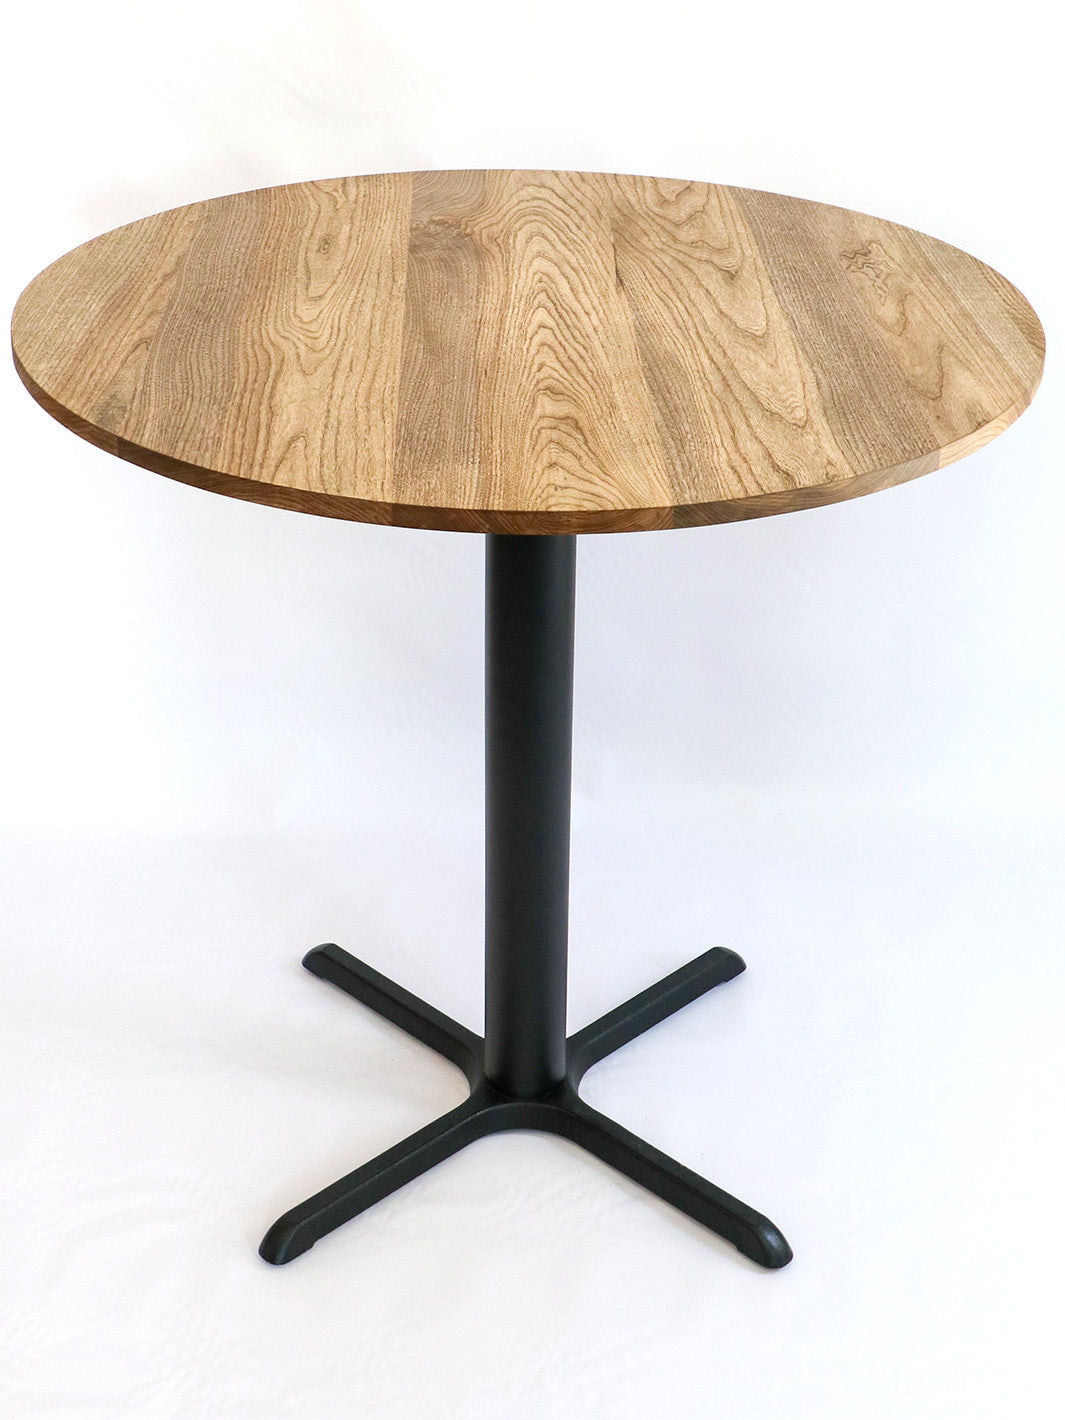 Modern Round Hackberry Pub Table with Black Steel Legs | Bar or Standard Height Earthly Comfort dining table 1529-5